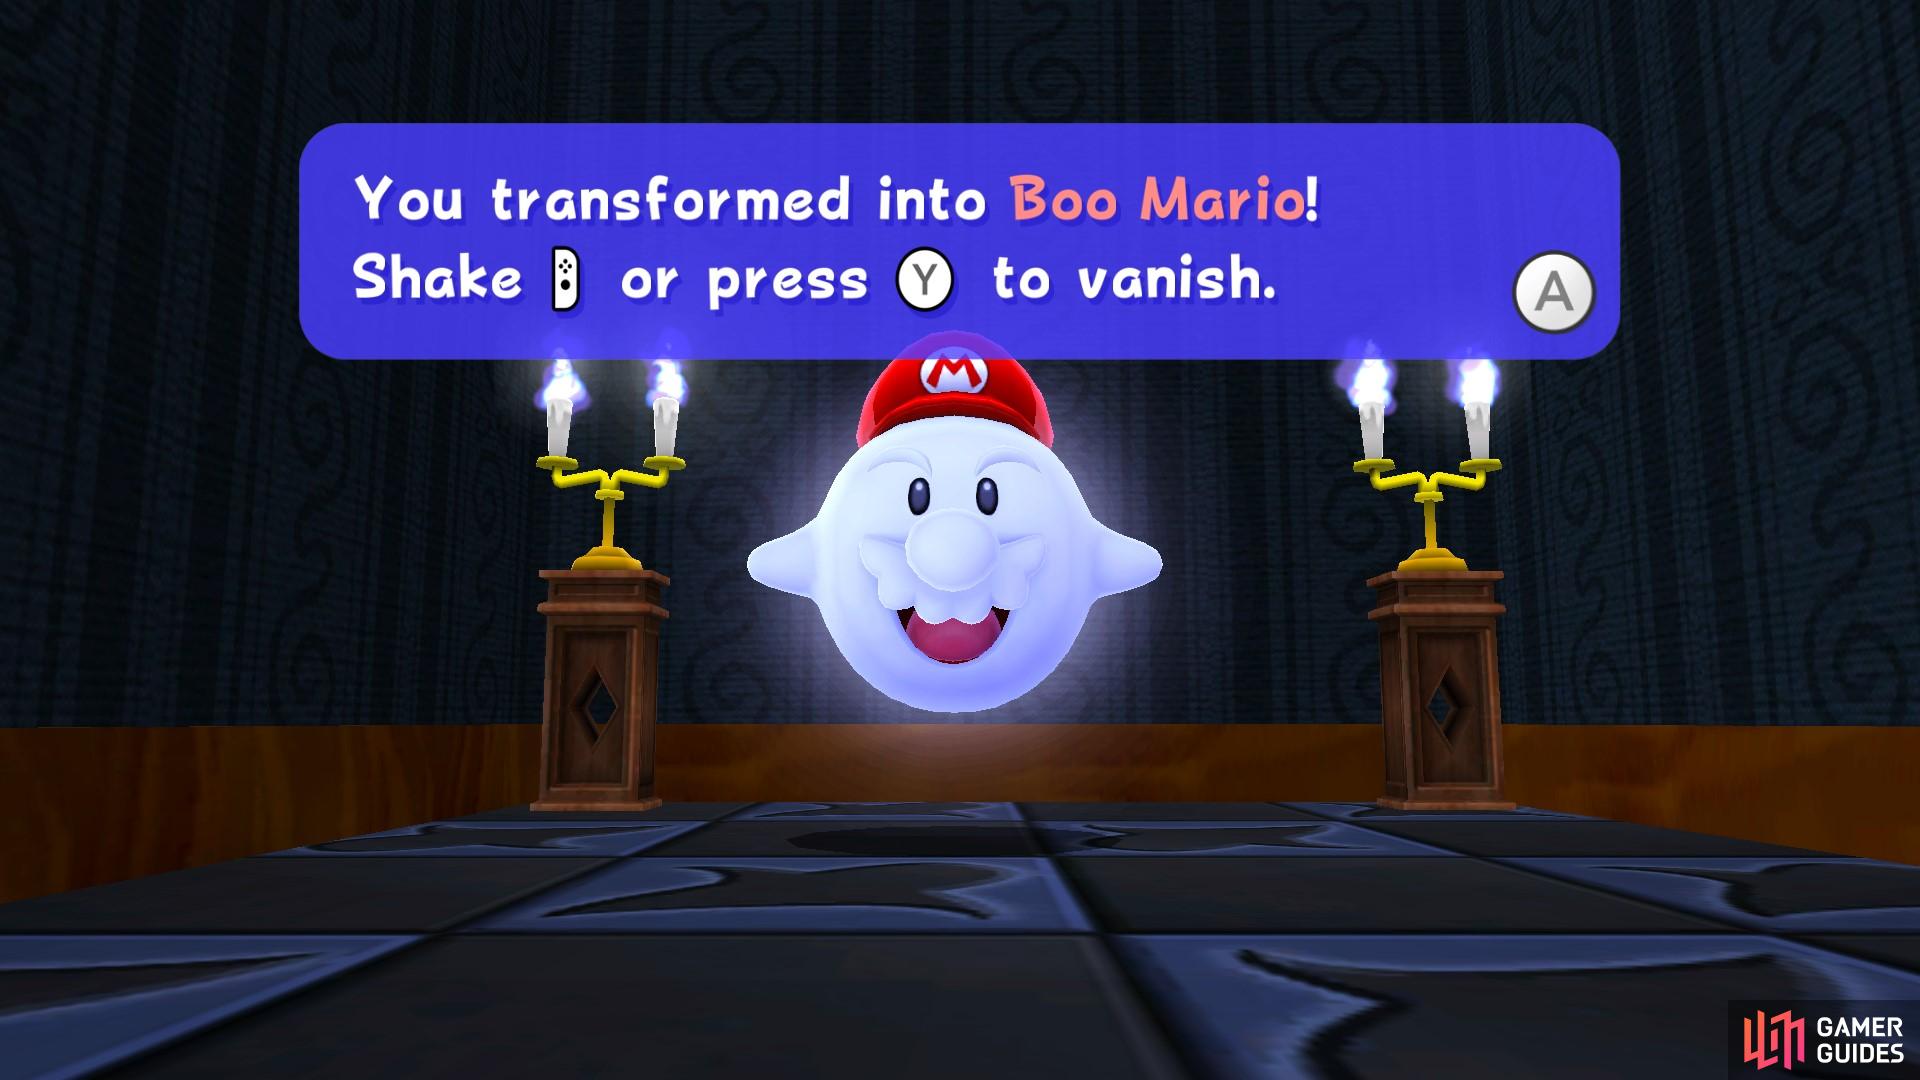 In Ghostly Galaxy, you’ll be introduced to Boo Mario!